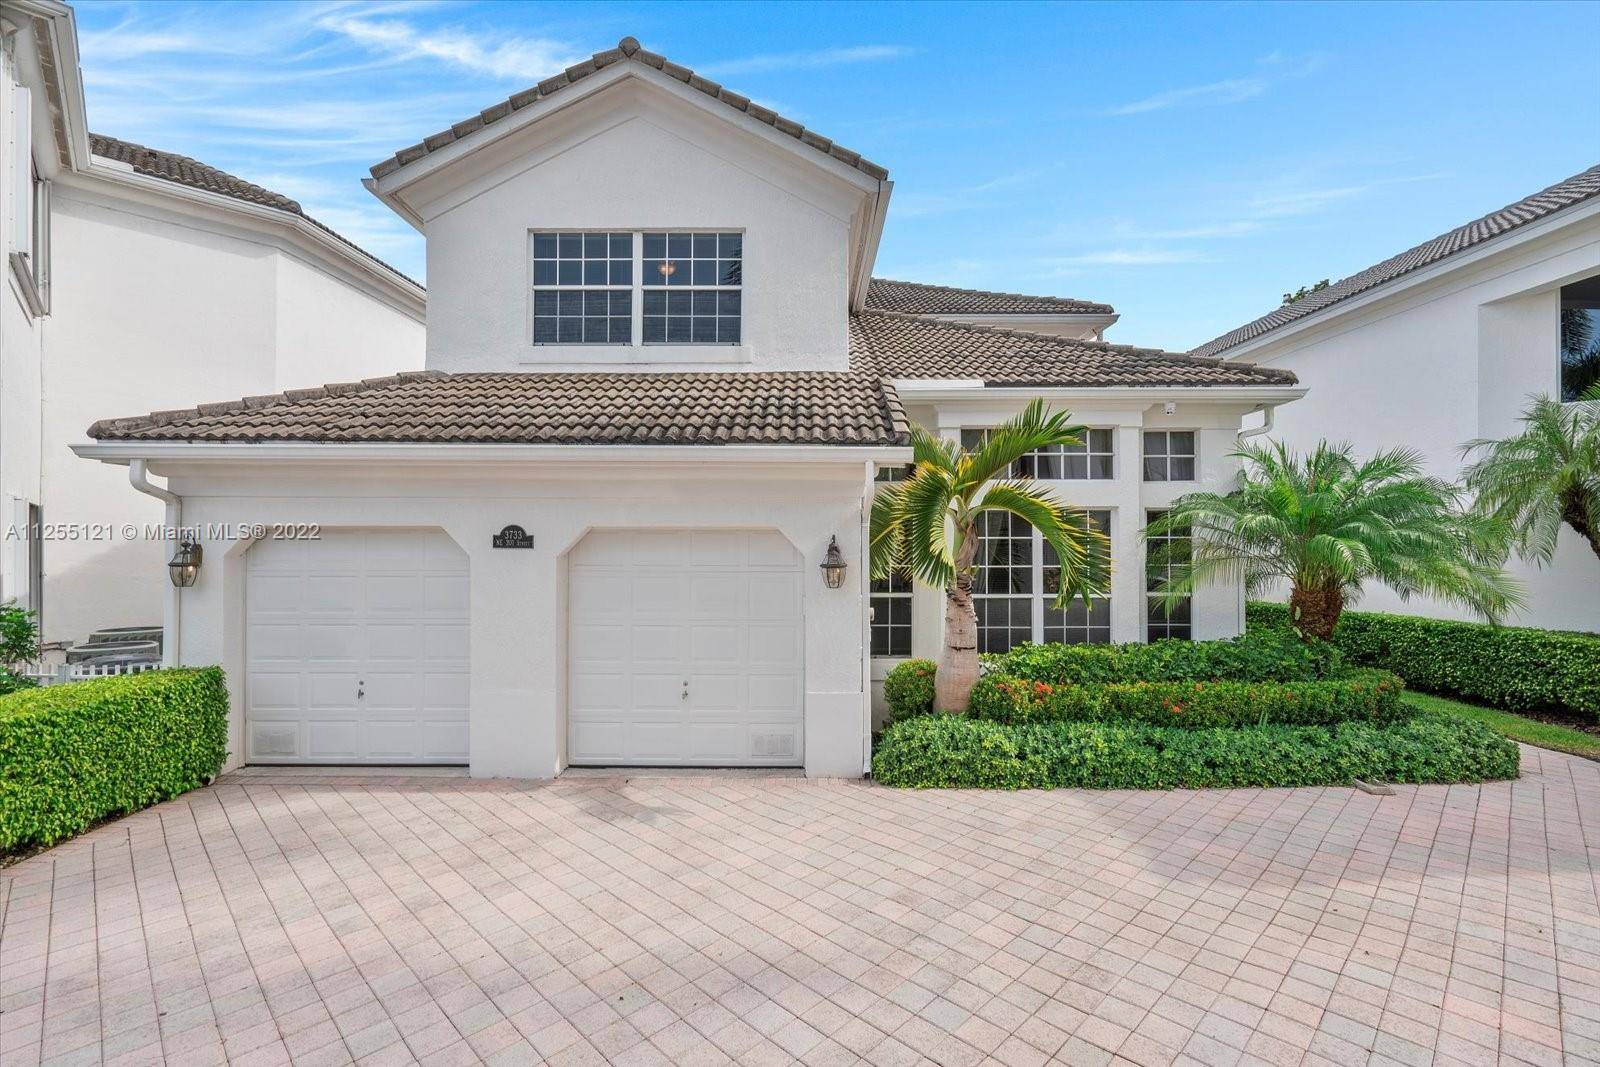 This home is located in the private, gated community of Country Club Estates.